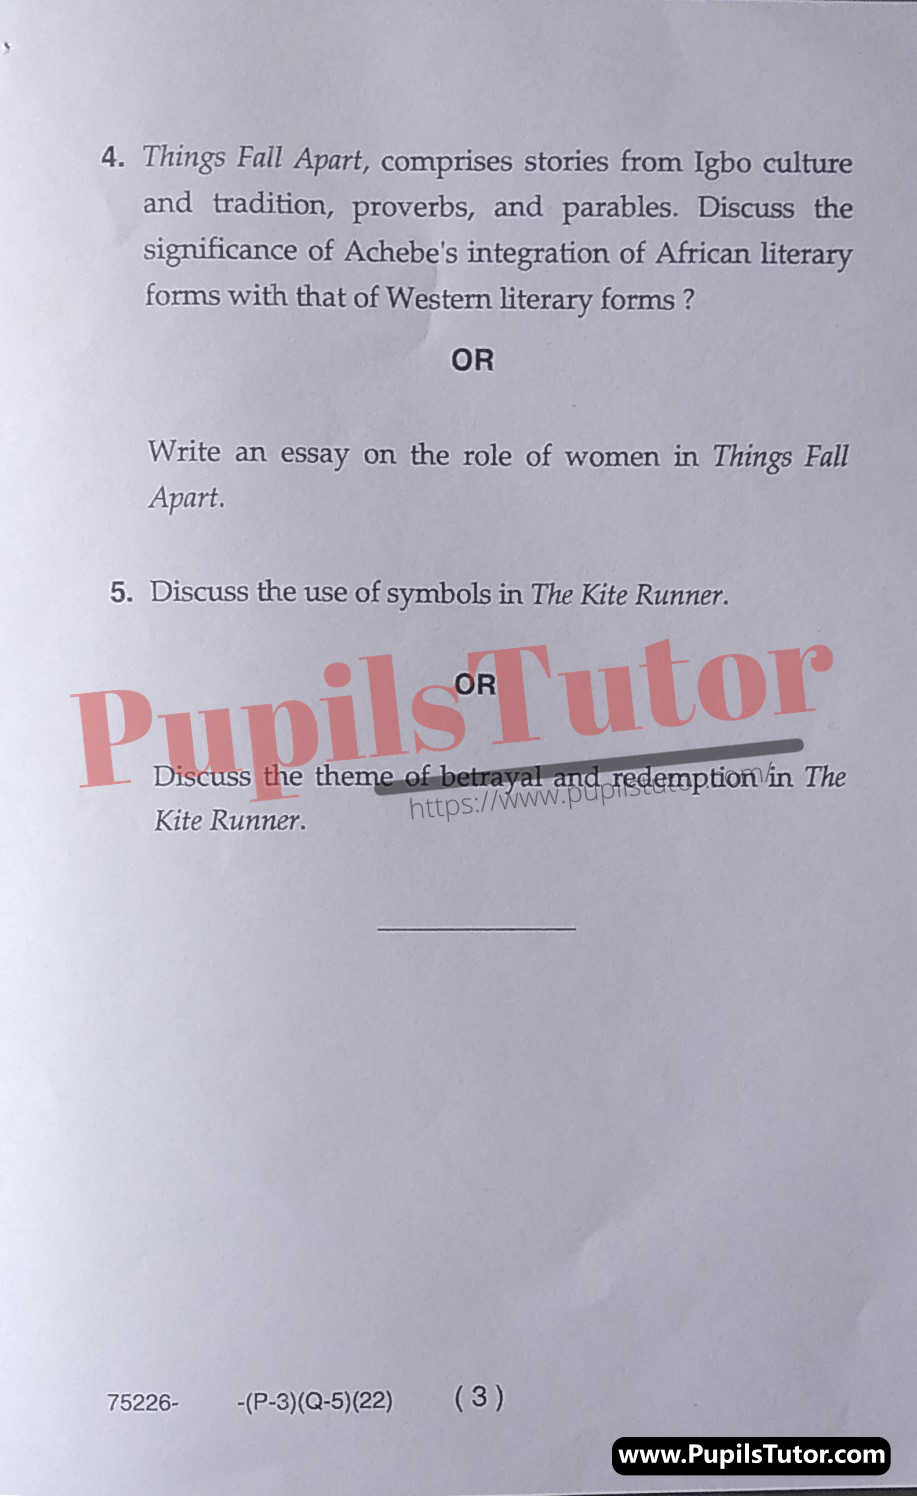 Free Download PDF Of M.D. University M.A. [English] Third Semester Latest Question Paper For Literature And Ethnicity Subject (Page 3) - https://www.pupilstutor.com